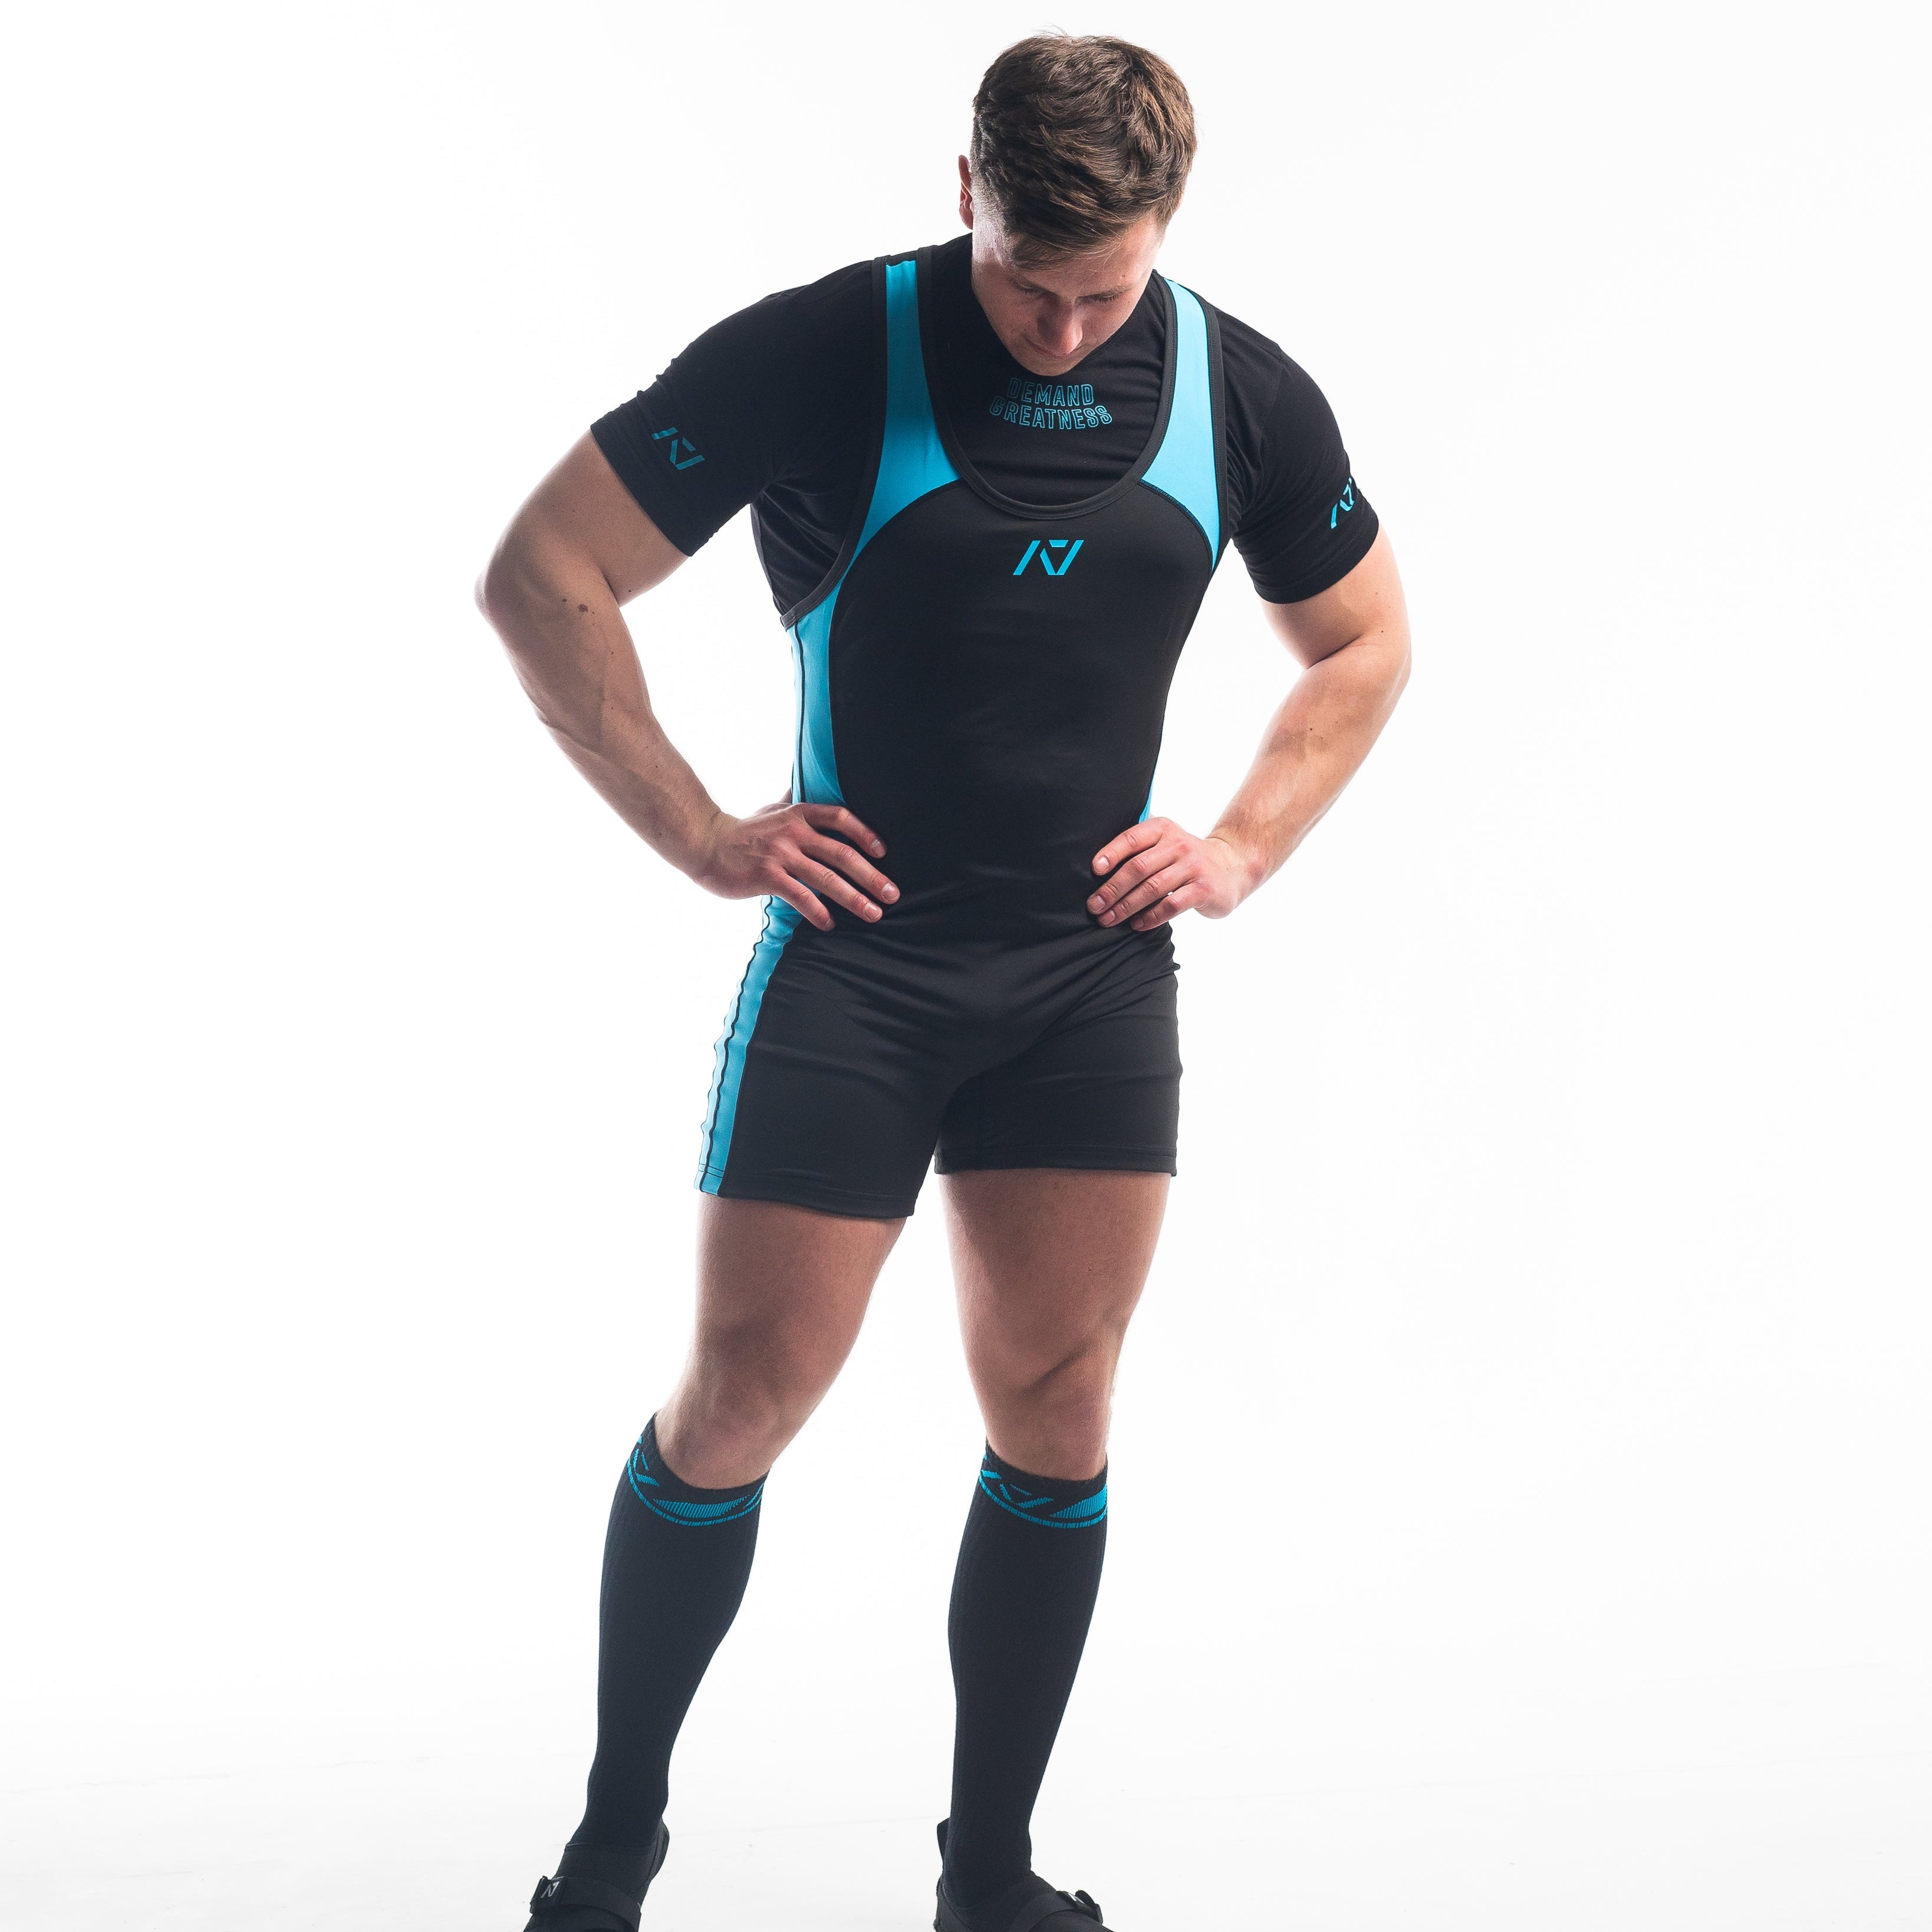 A7 IPF Approved Azul Luno singlet features extra lat mobility, side panel stitching to guide the squat depth level and curved panel design for a slimming look. The Women's cut singlet features a tapered waist and additional quad room. The IPF Approved Kit includes Luno Powerlifting Singlet, A7 Meet Shirt, A7 Deadlift Socks, Hourglass Knee Sleeves (Stiff Knee Sleeves and Rigor Mortis Knee Sleeves). All A7 Powerlifting Equipment shipping to UK, Norway, Switzerland and Iceland.